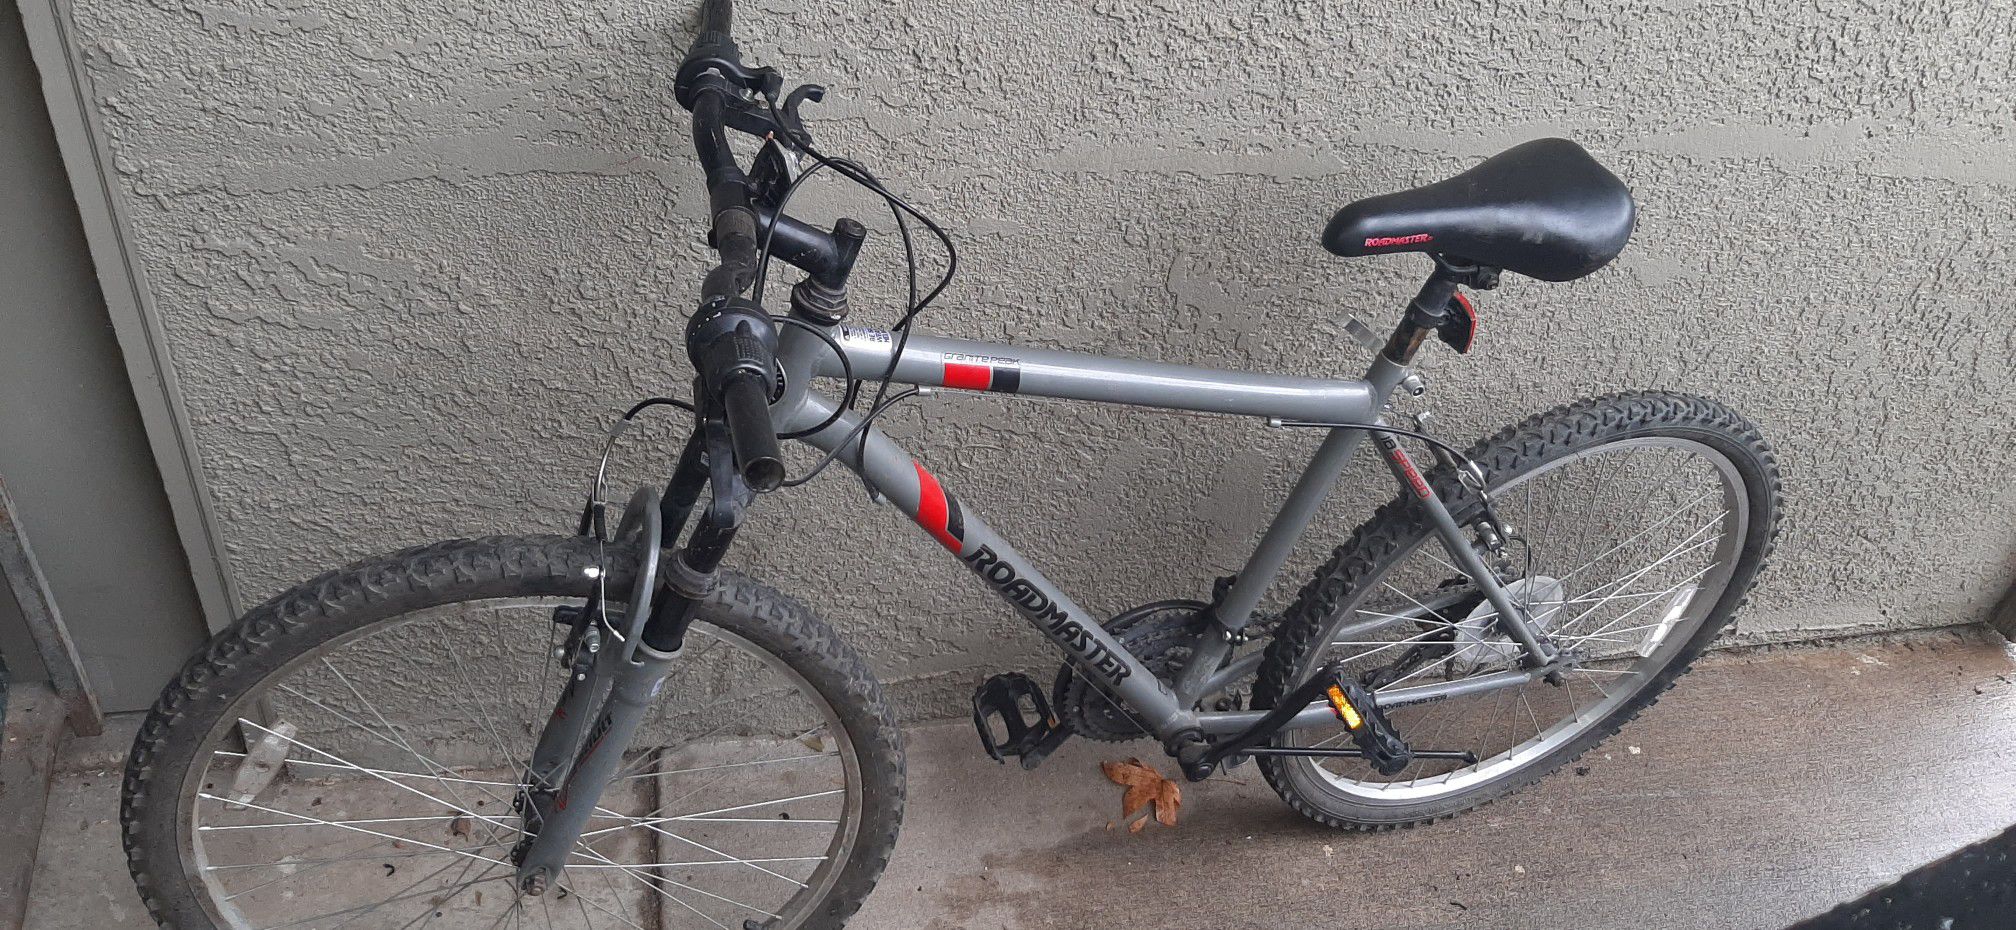 26" Roadmaster mountain bike for sale only $50